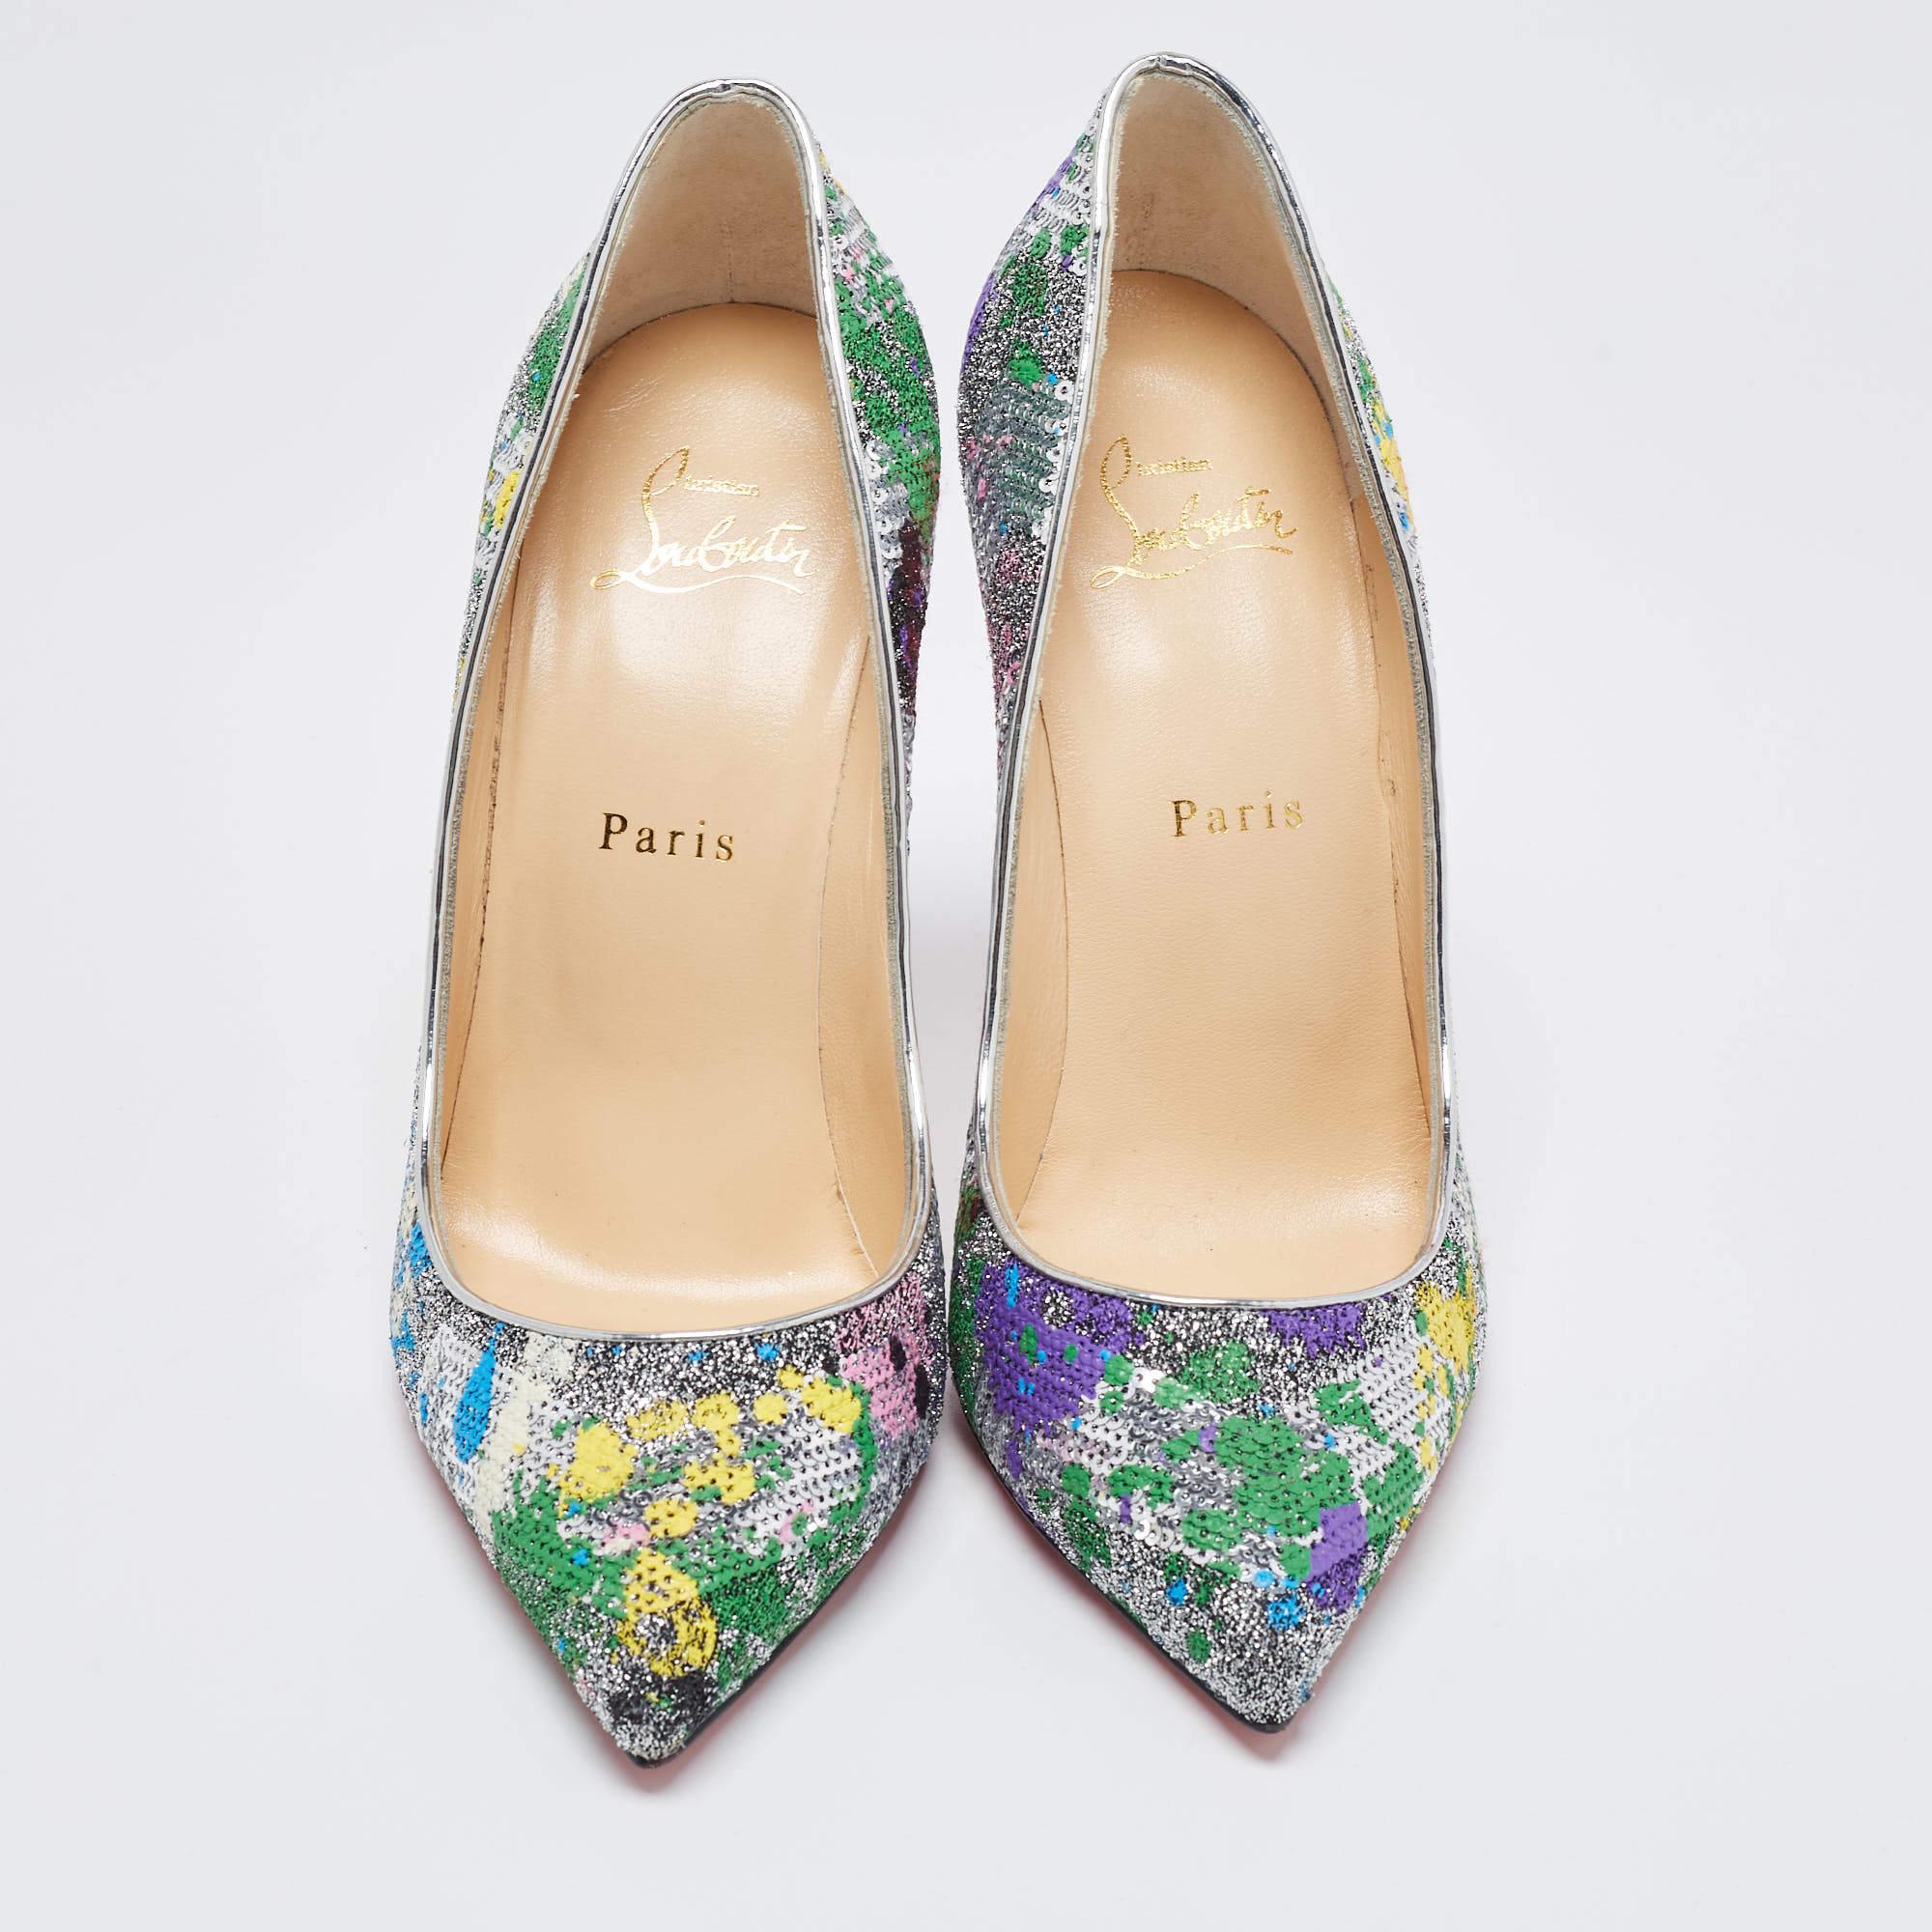 The architectural silhouette and contemporary design of this pair of Christian Louboutin pumps exemplify the brand's mastery in the art of stiletto making. Finely created from multicolored sequins and brocade fabric, it stands elegantly on 11cm